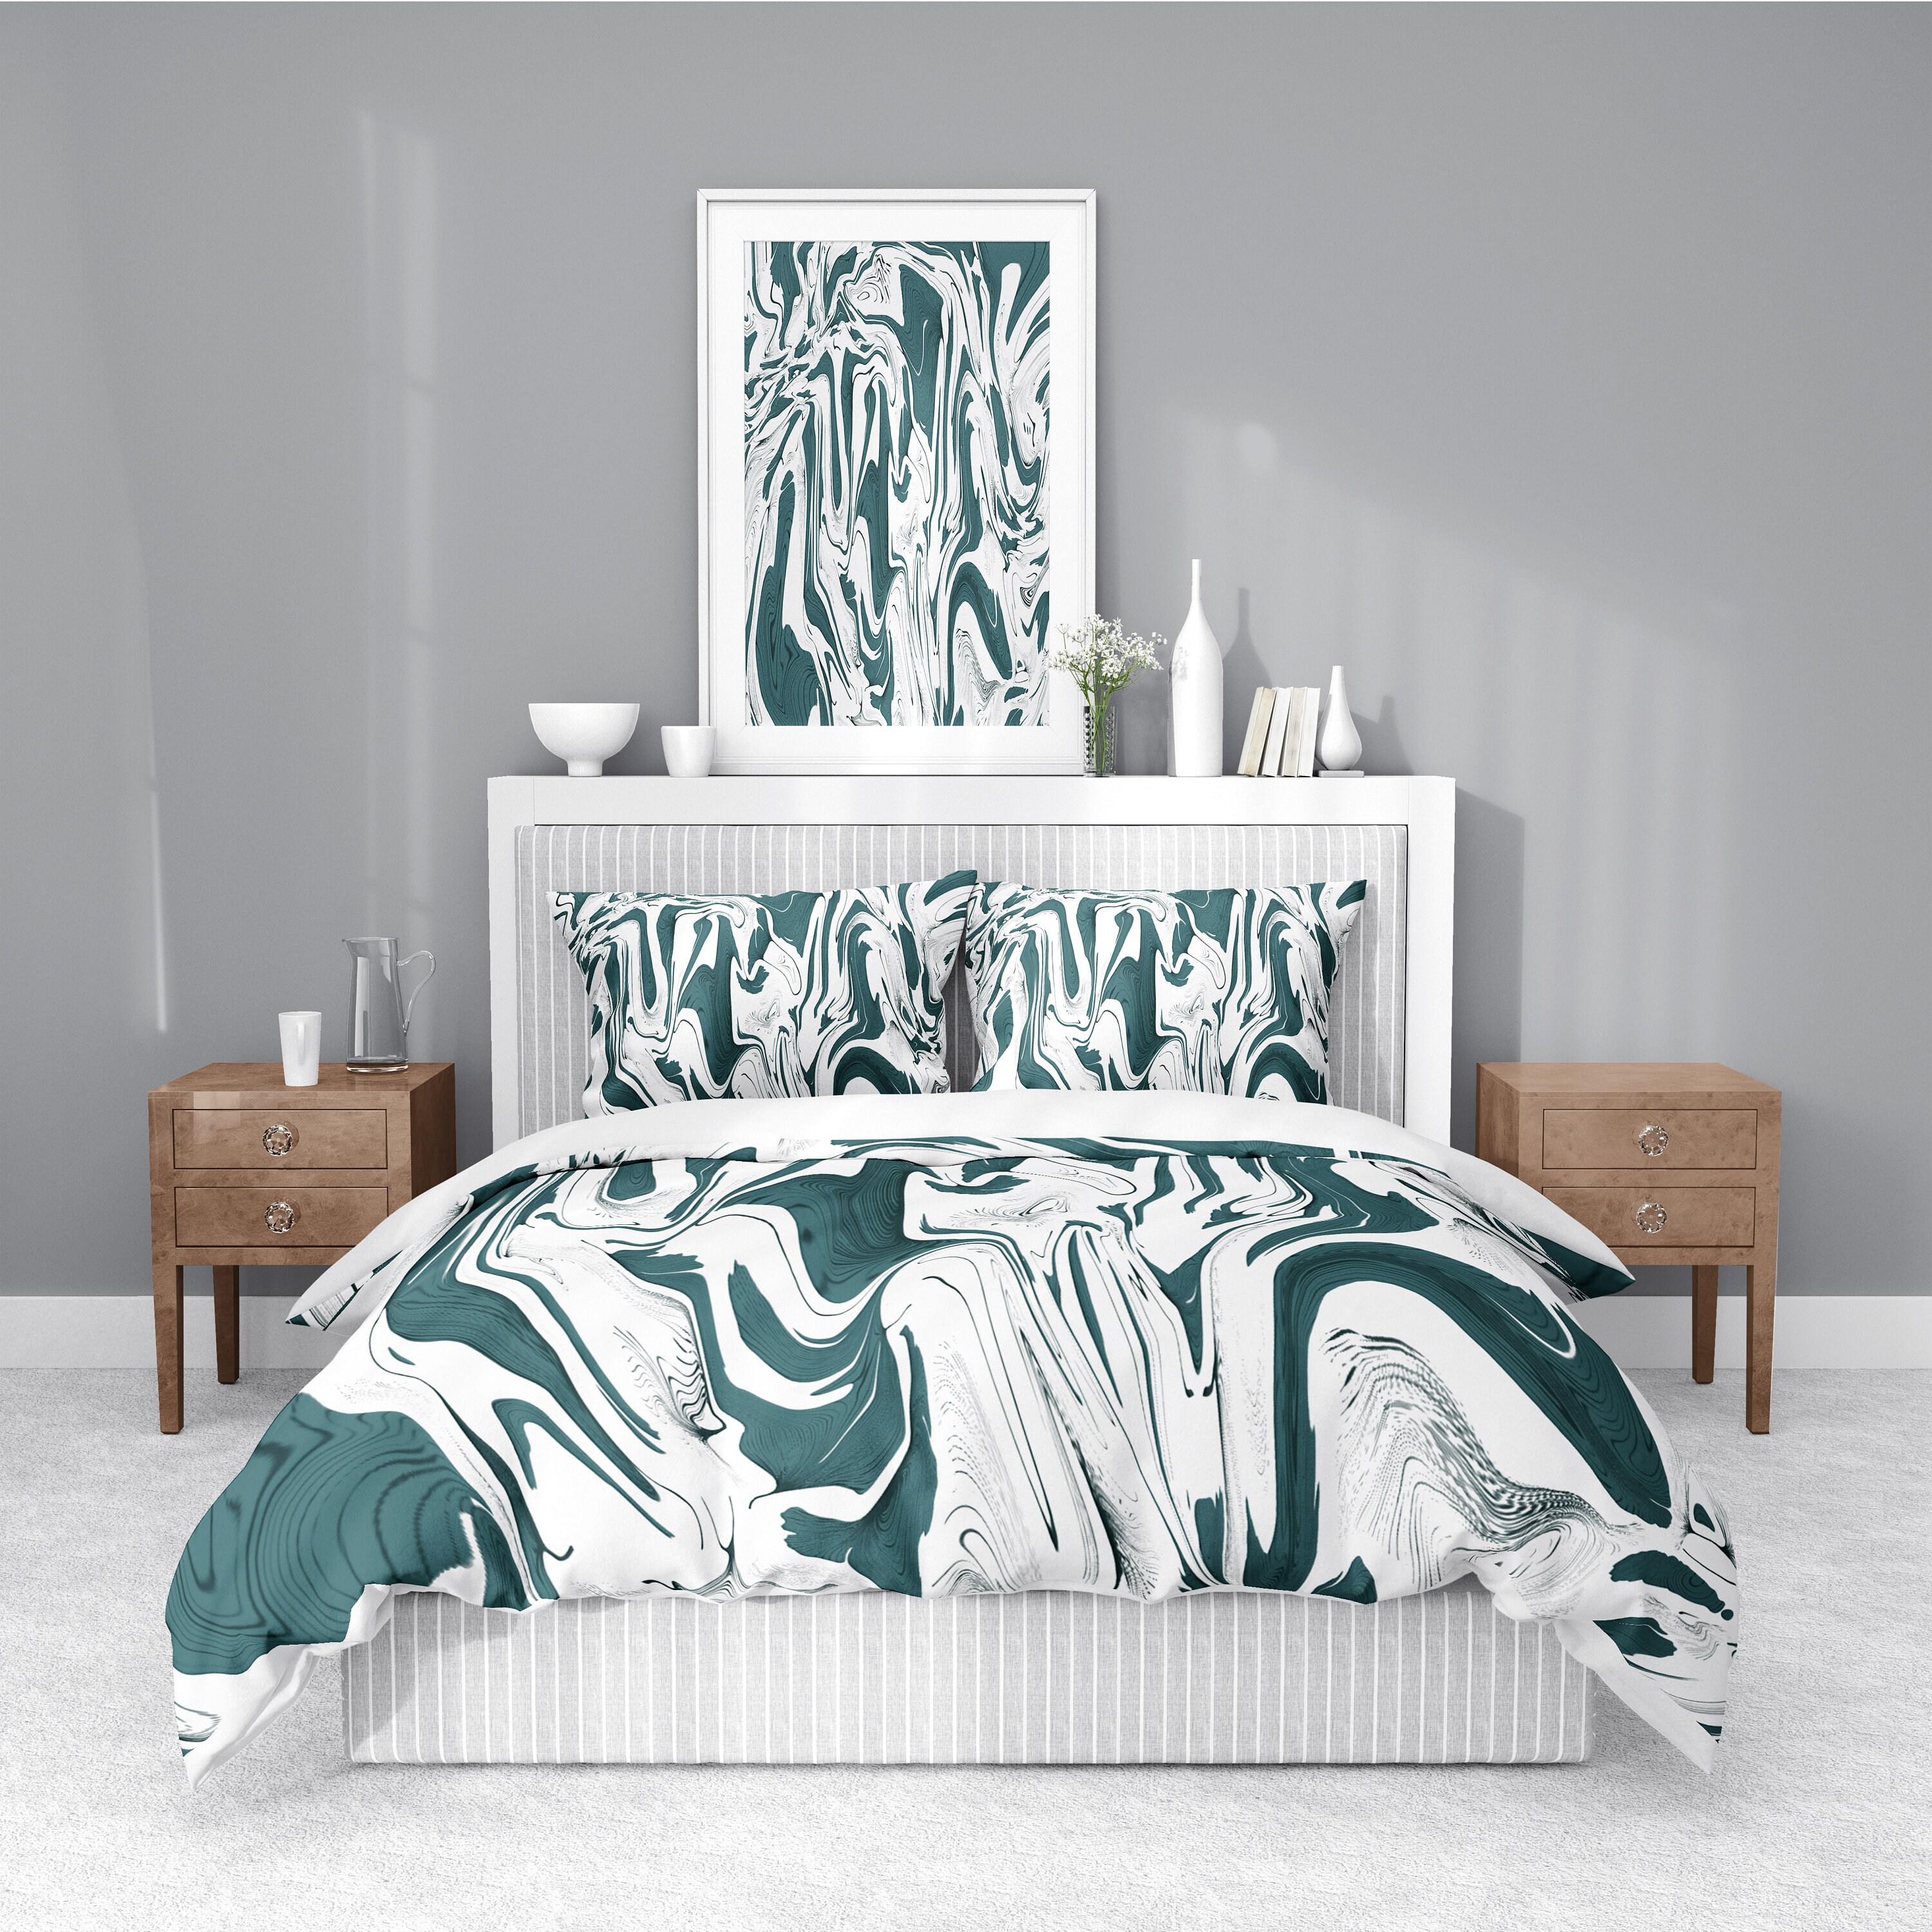 Teal and White Marble Swirl Comforter or Duvet Cover Twin | Etsy